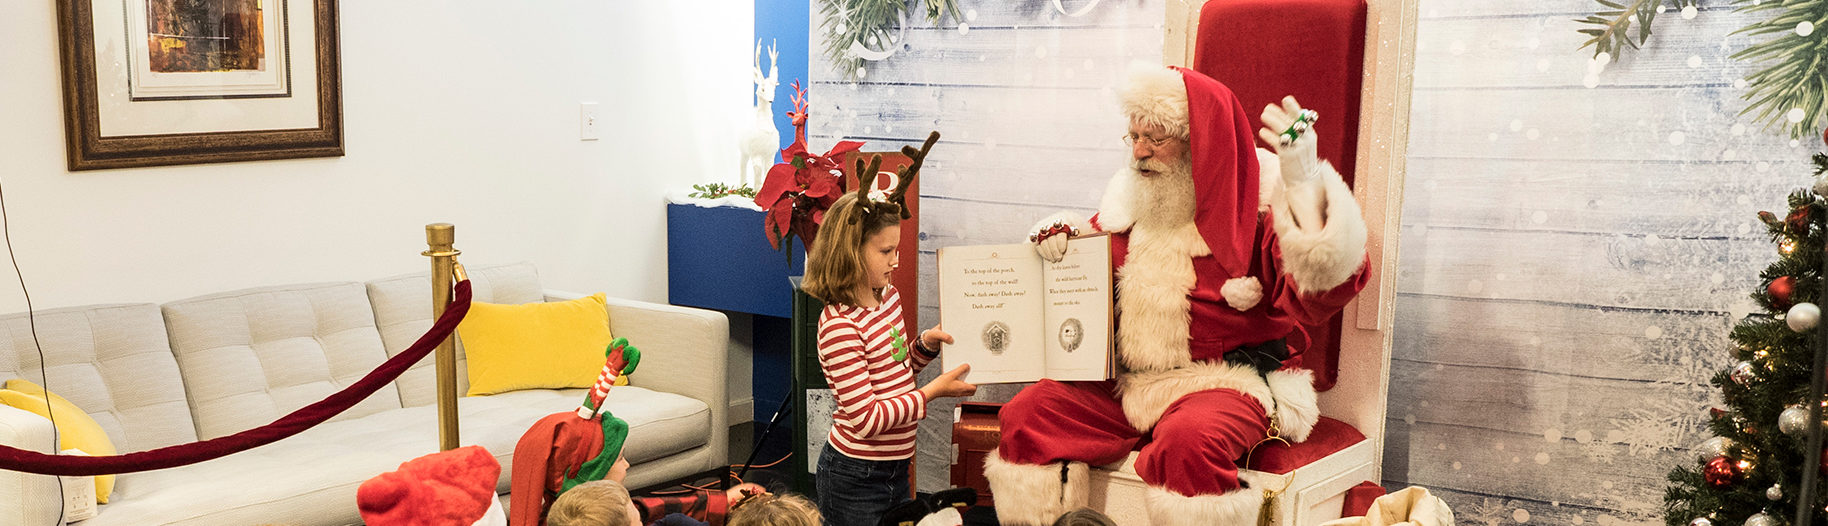 Edifice Lil’ Tykes Christmas Party | Santa Comes to Town